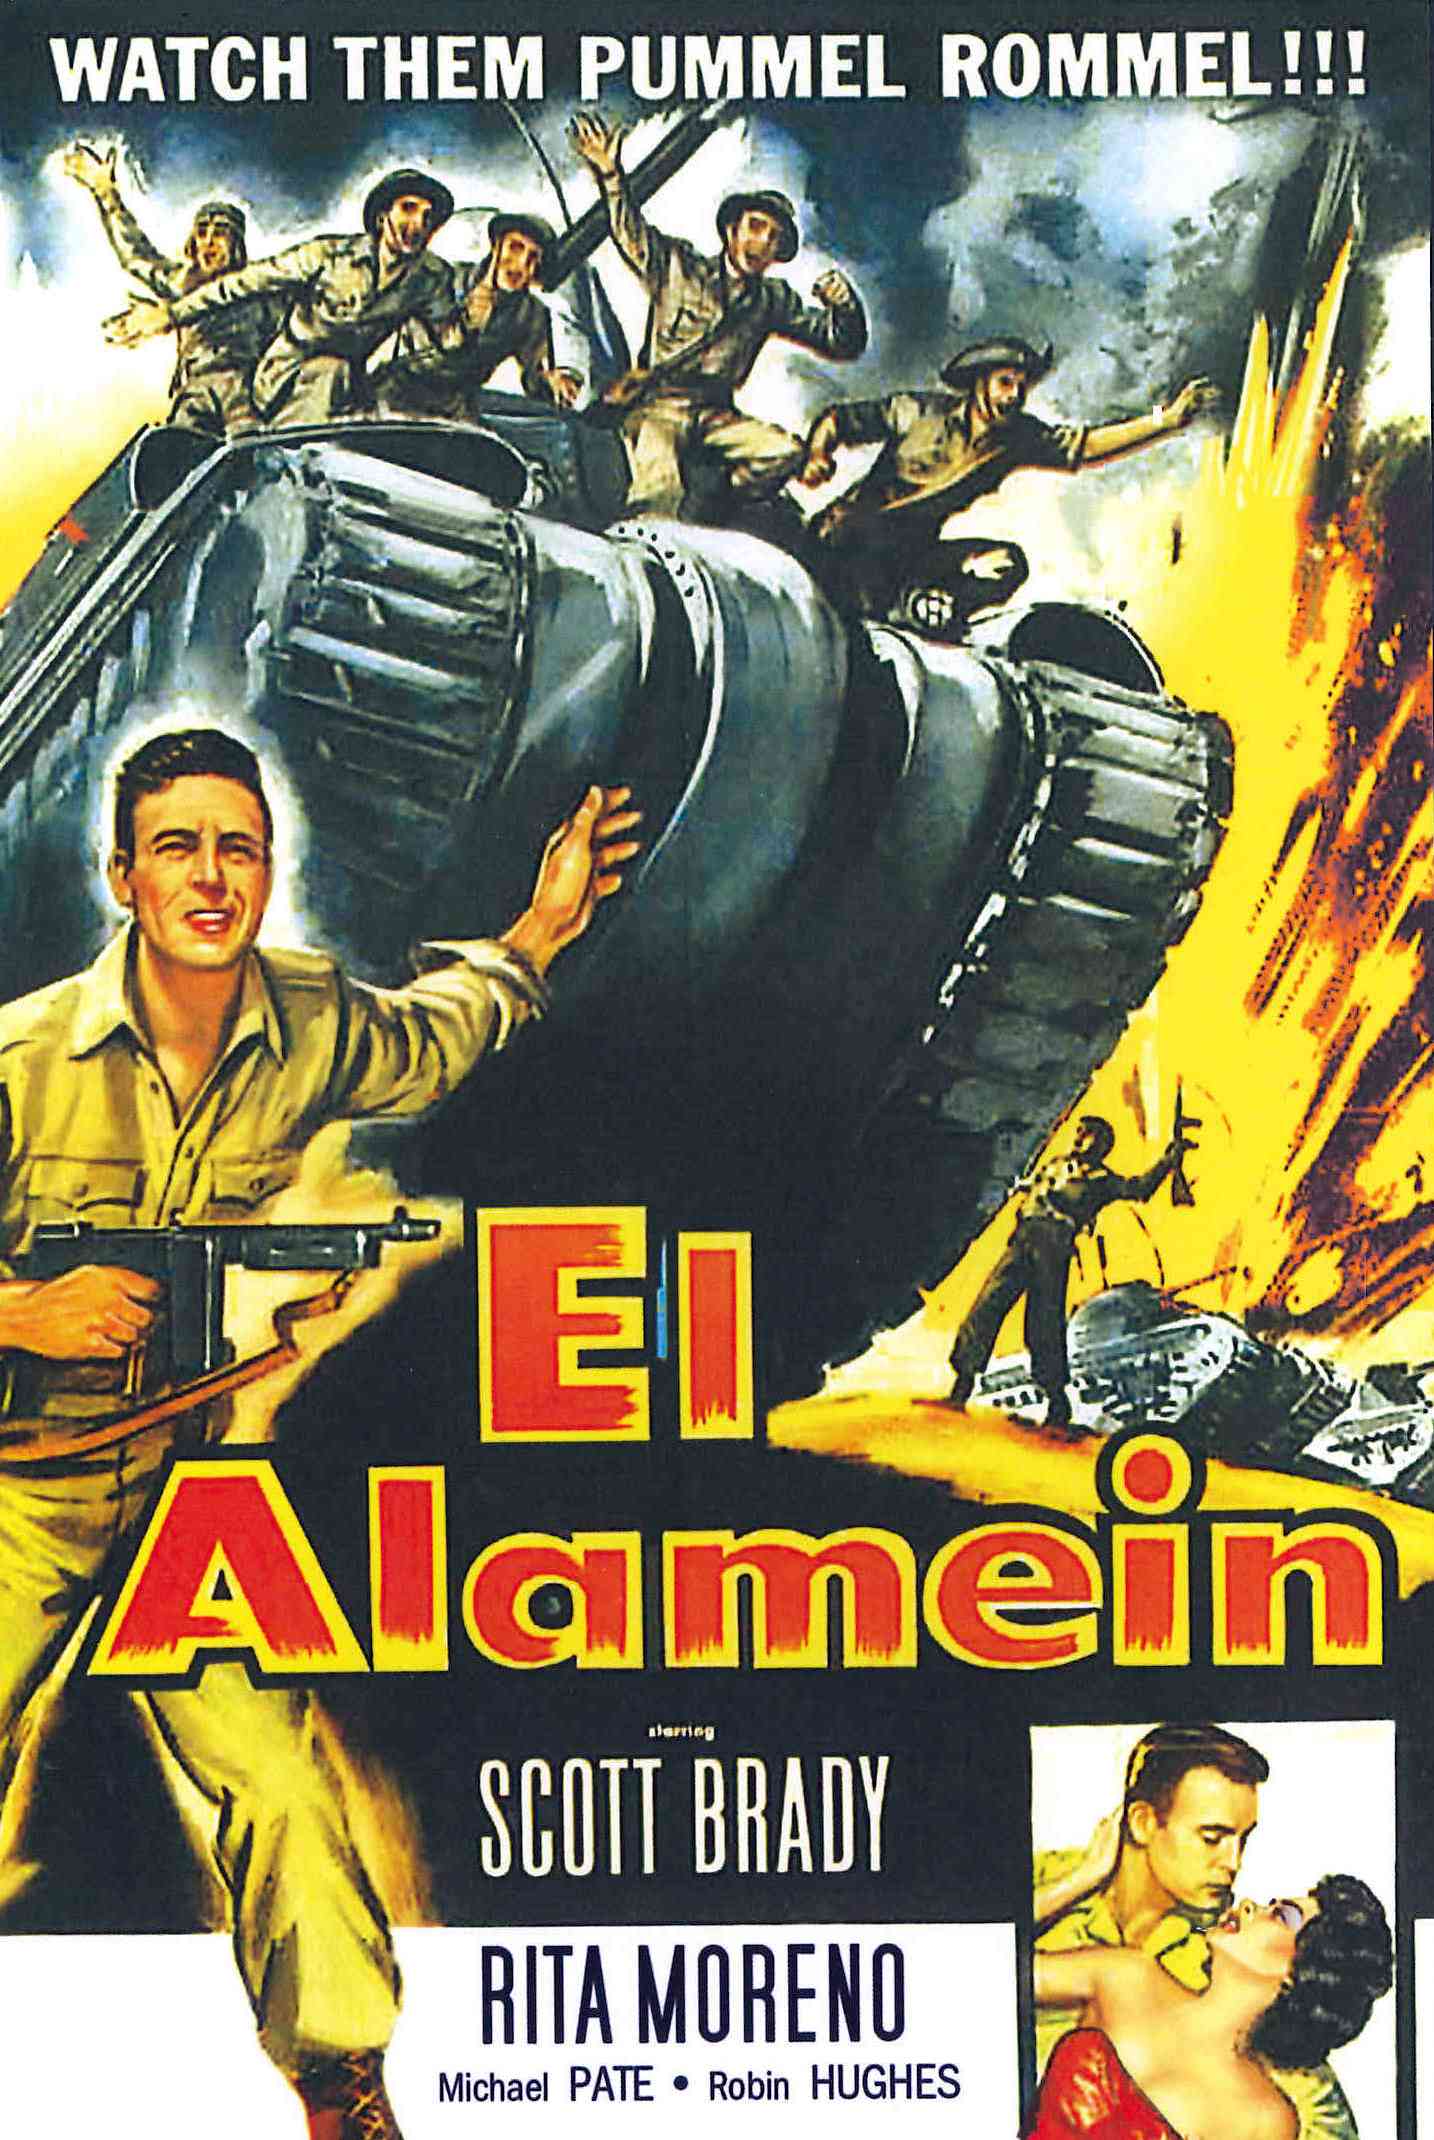 Alamein cover art